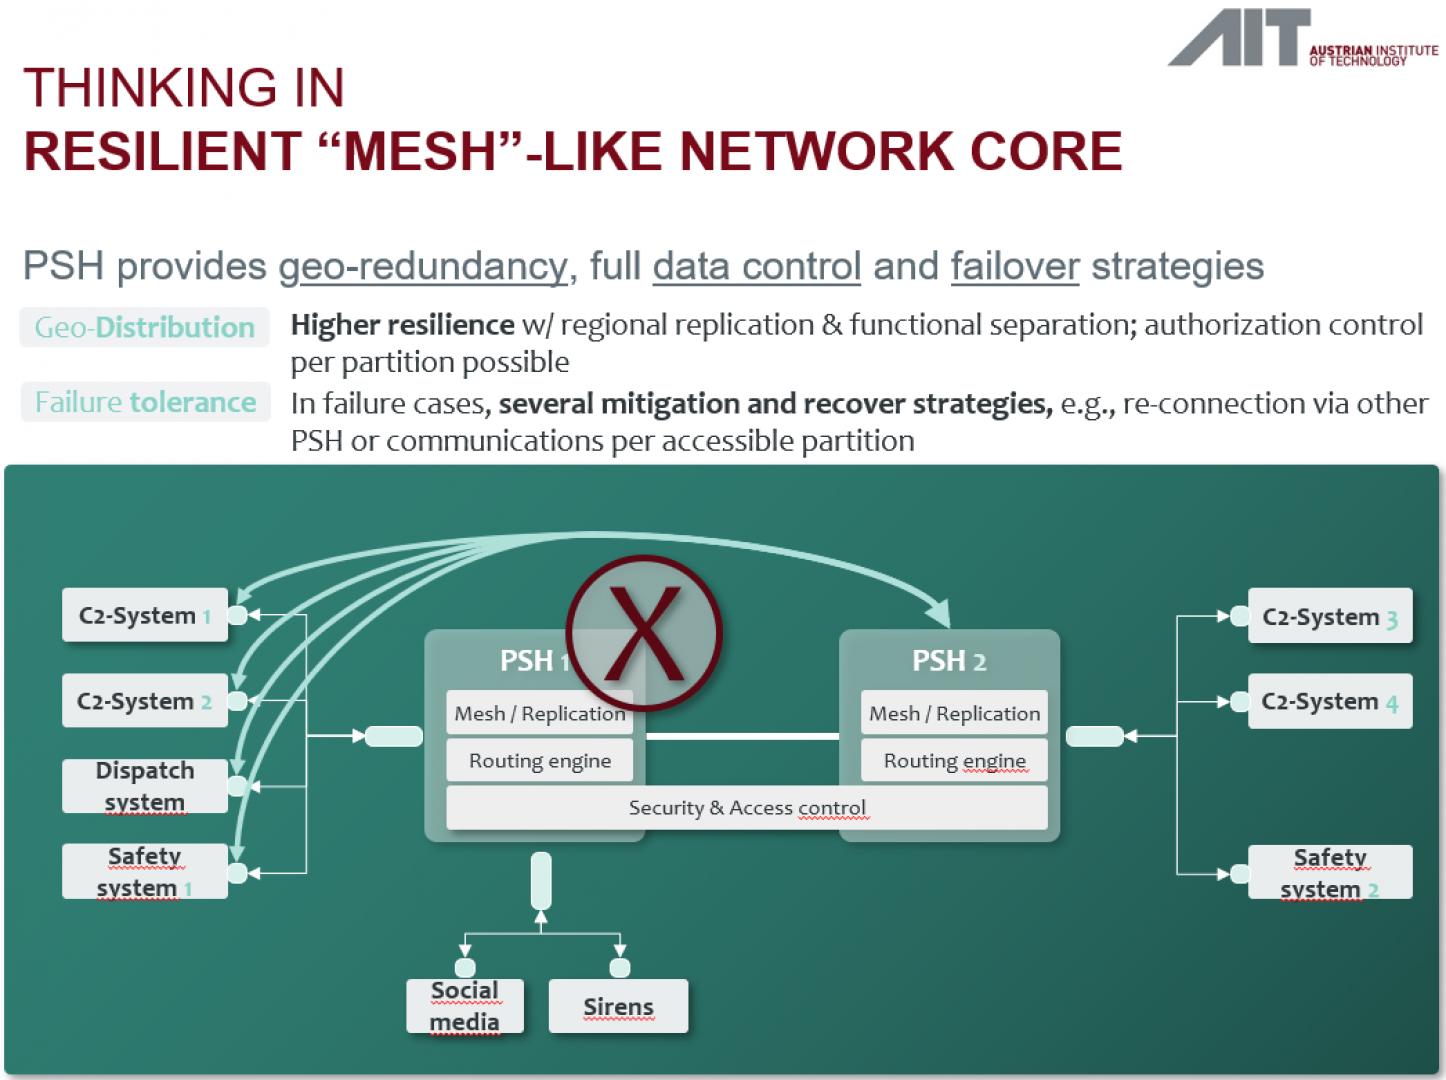 AIT PSH - Resilience: A "Mesh"-like network core combines high resilience with the convenience of central systems